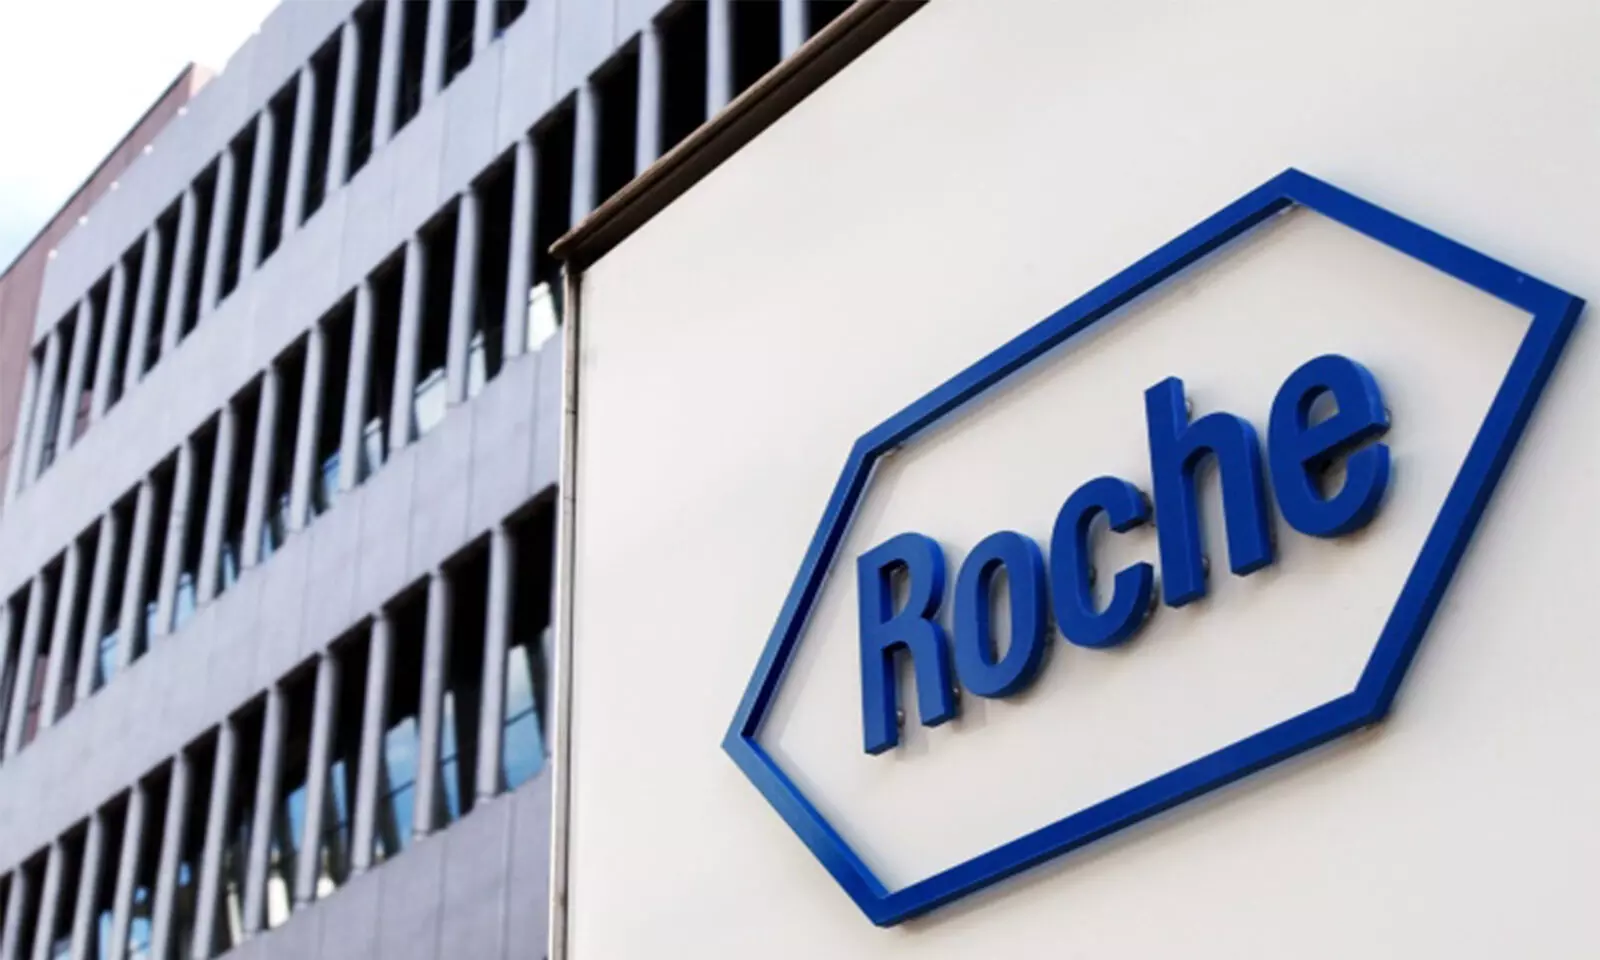 COVID test: Roche gets USFDA emergency use nod for cobas SARS-CoV-2 Duo